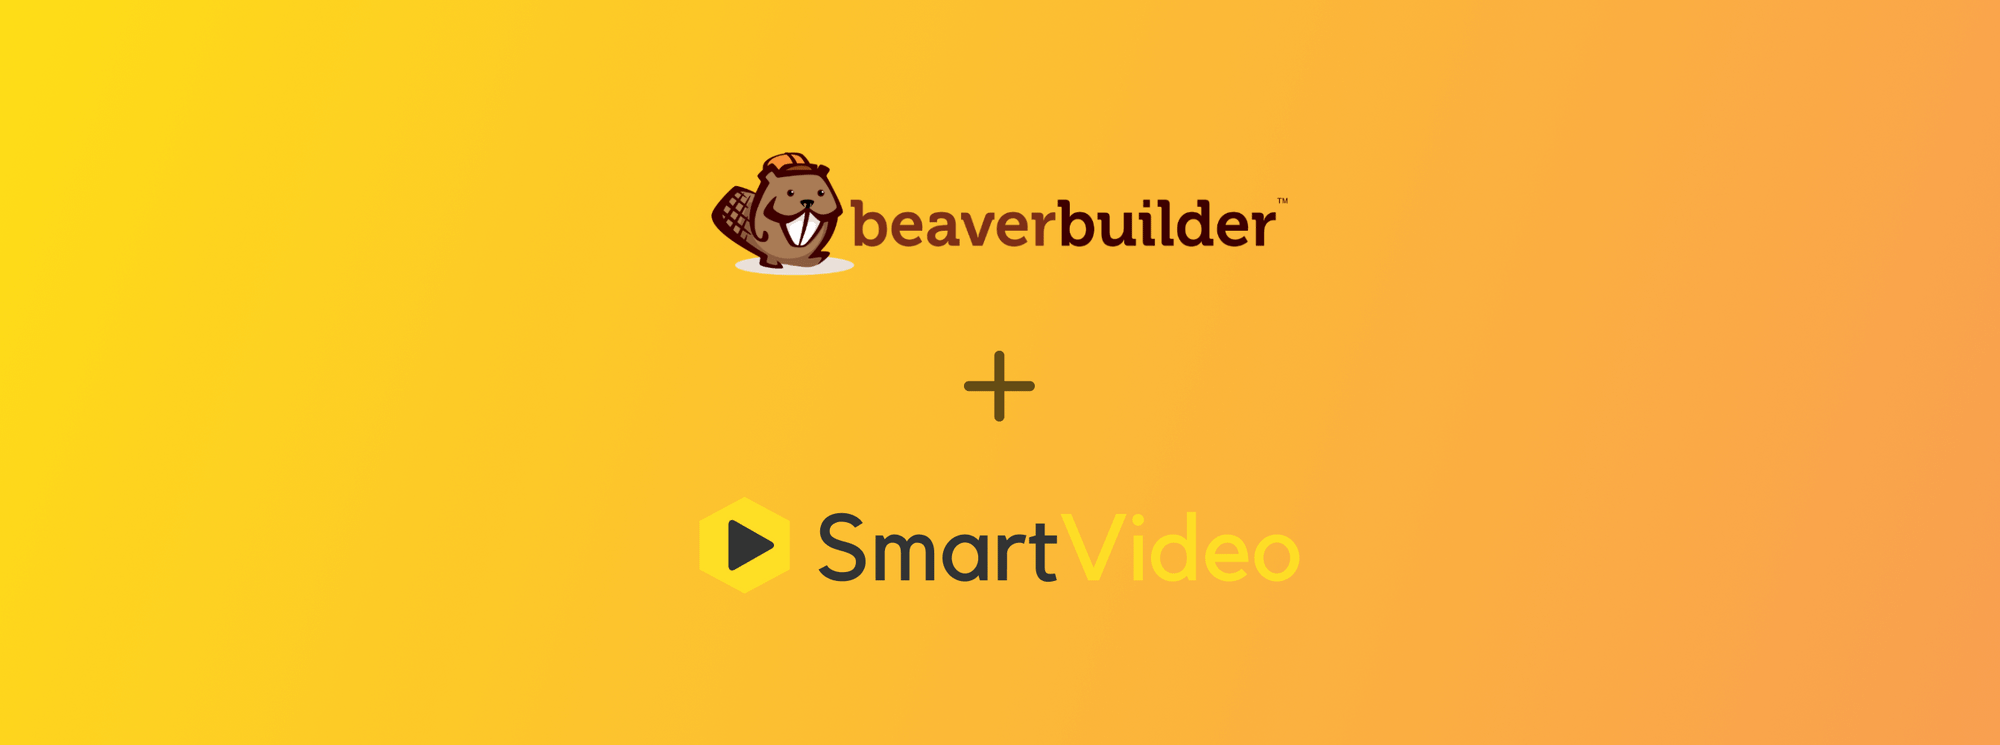 Creating a professional video experience with Beaver Builder & SmartVideo